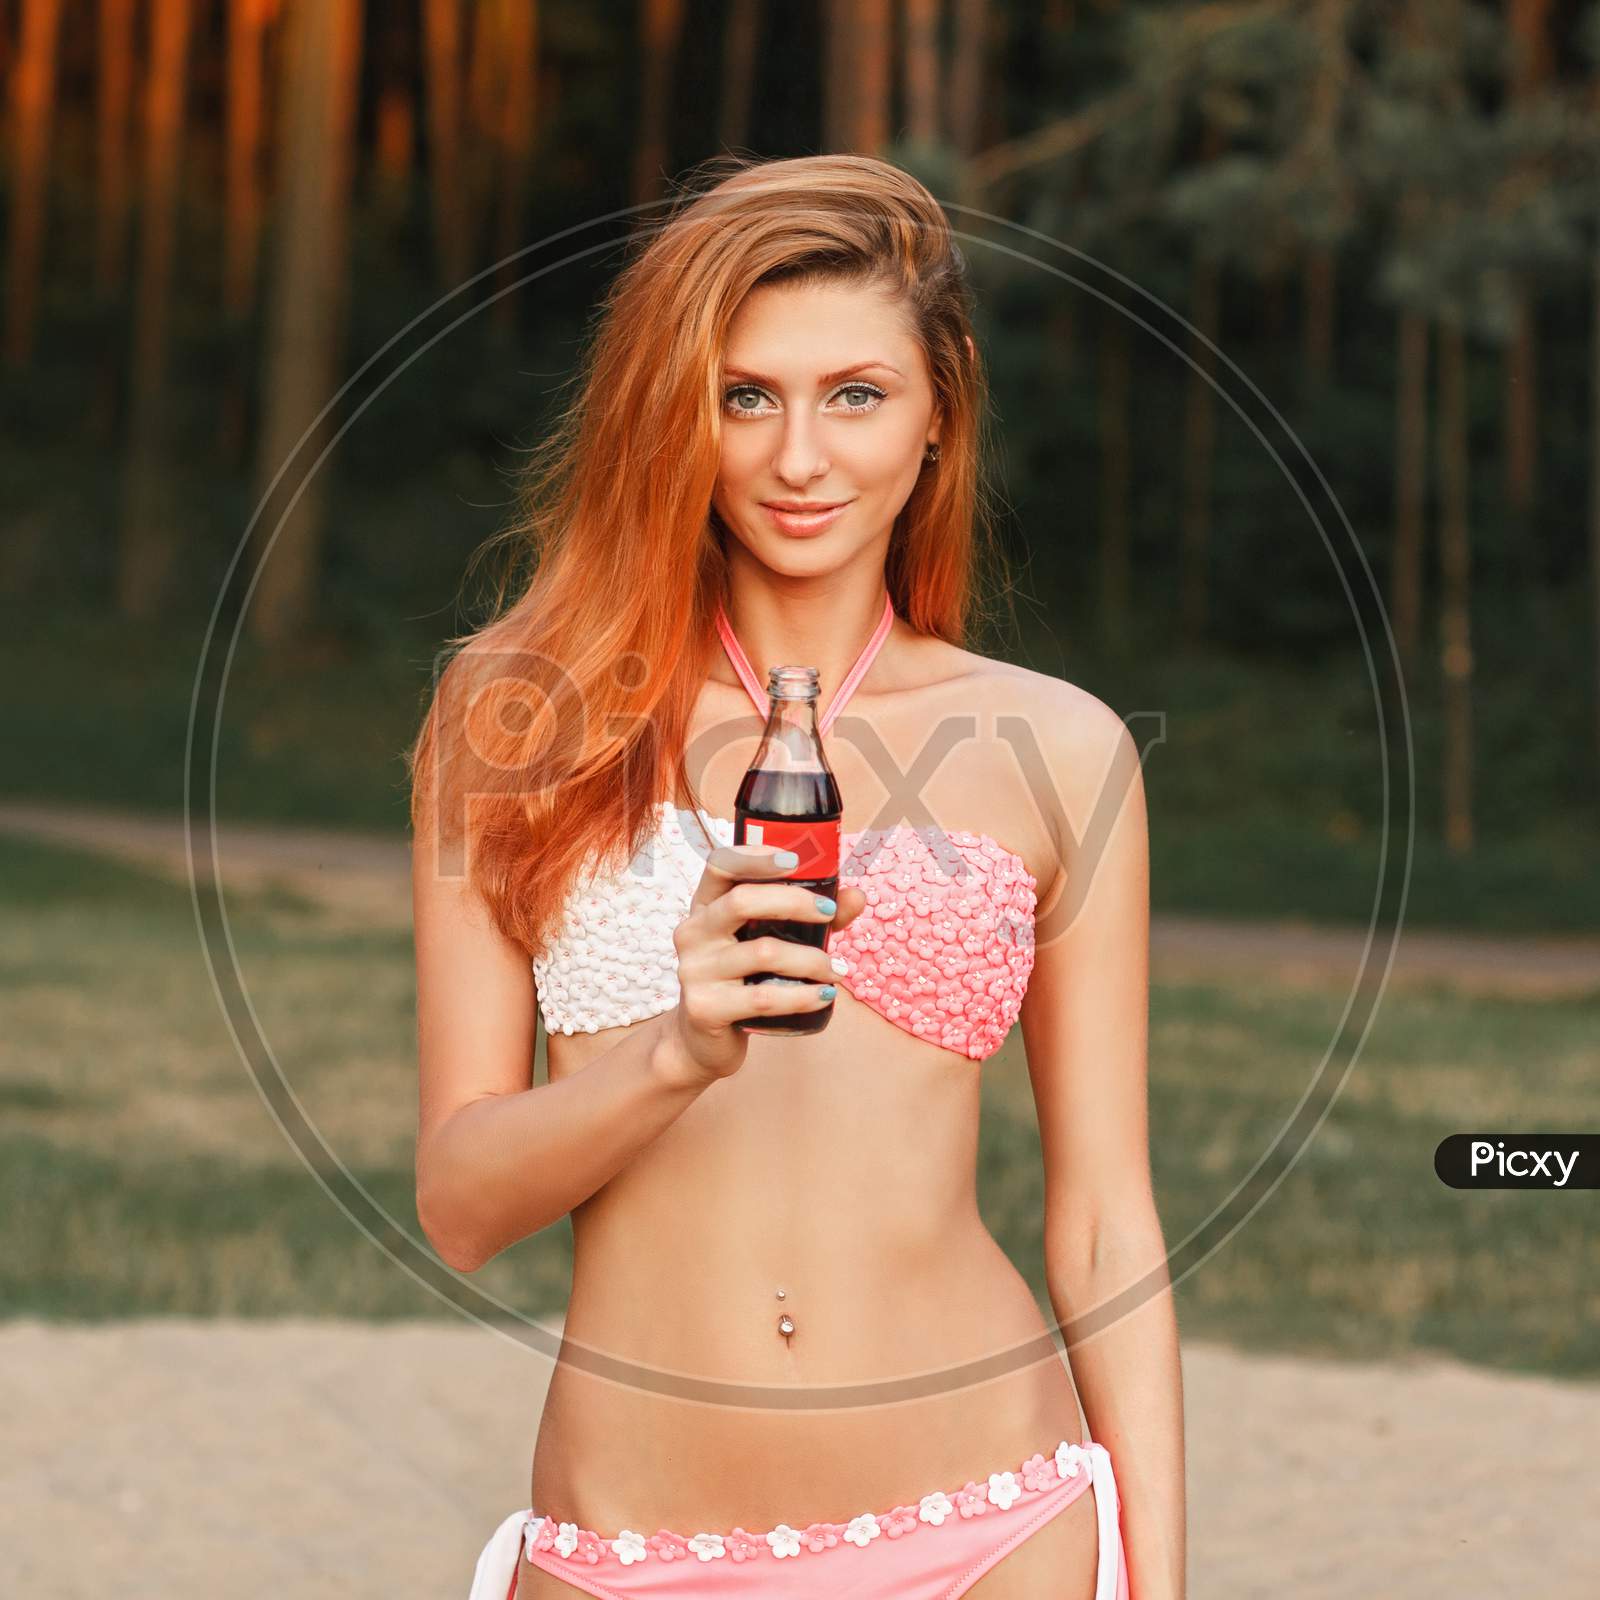 Beautiful Girl With Red Hair Holding A Bottle Of Drink